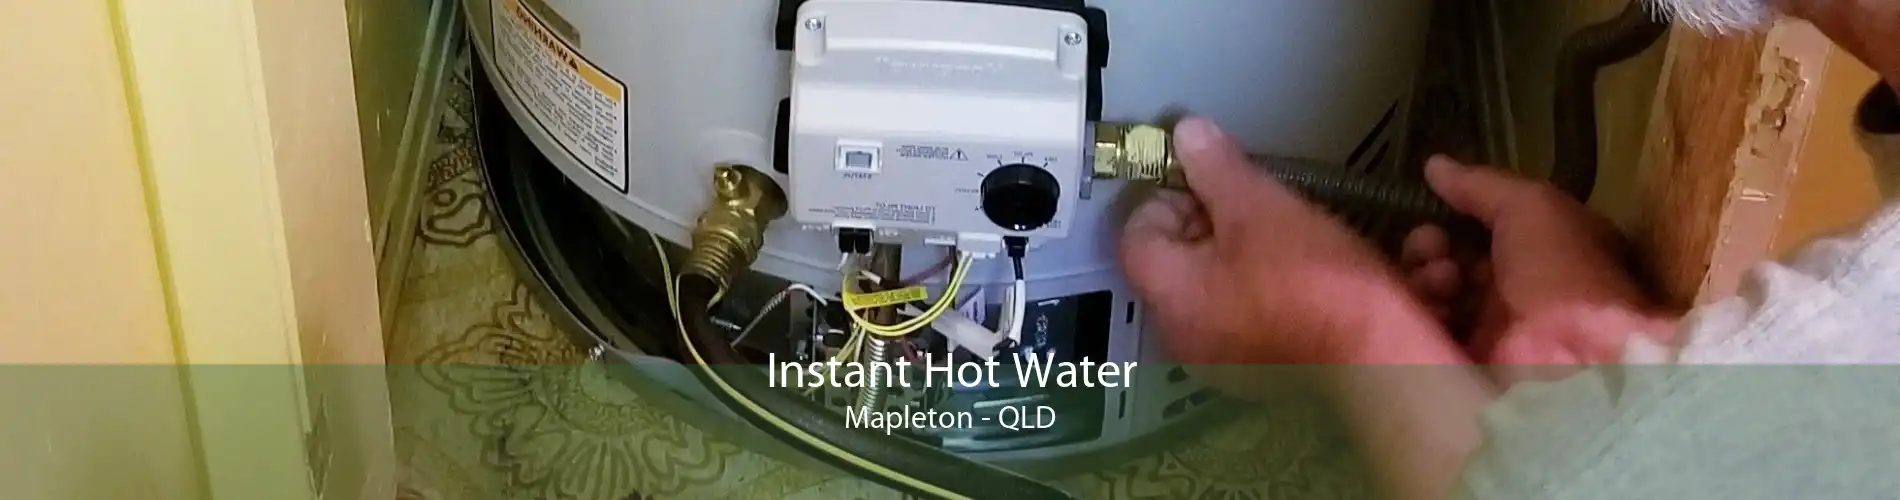 Instant Hot Water Mapleton - QLD